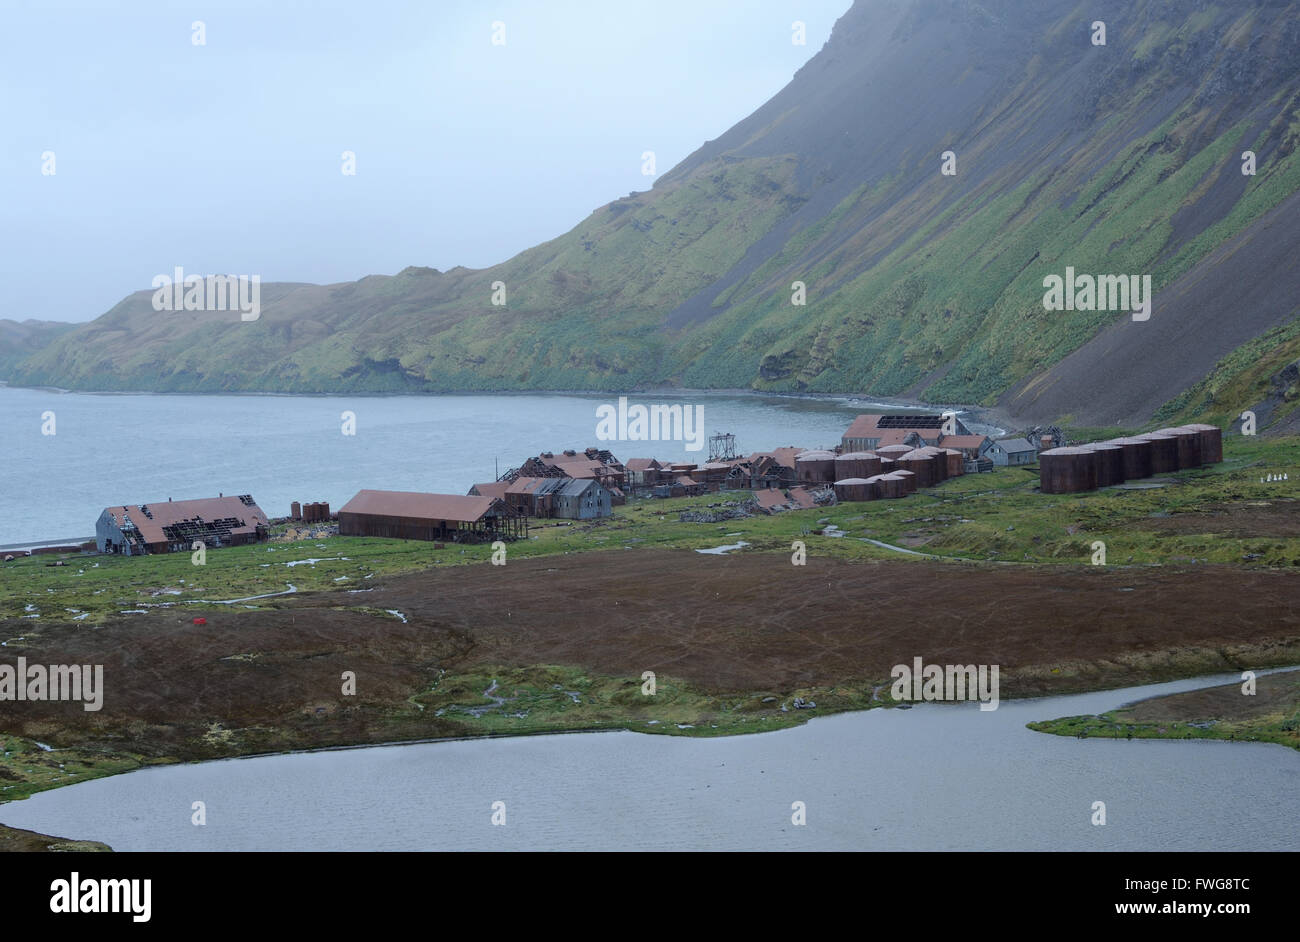 The ruined abandoned whaling station in Stromness and Stromness Bay.  Stromness, Stromness Bay, South Georgia, South Atlantic. Stock Photo